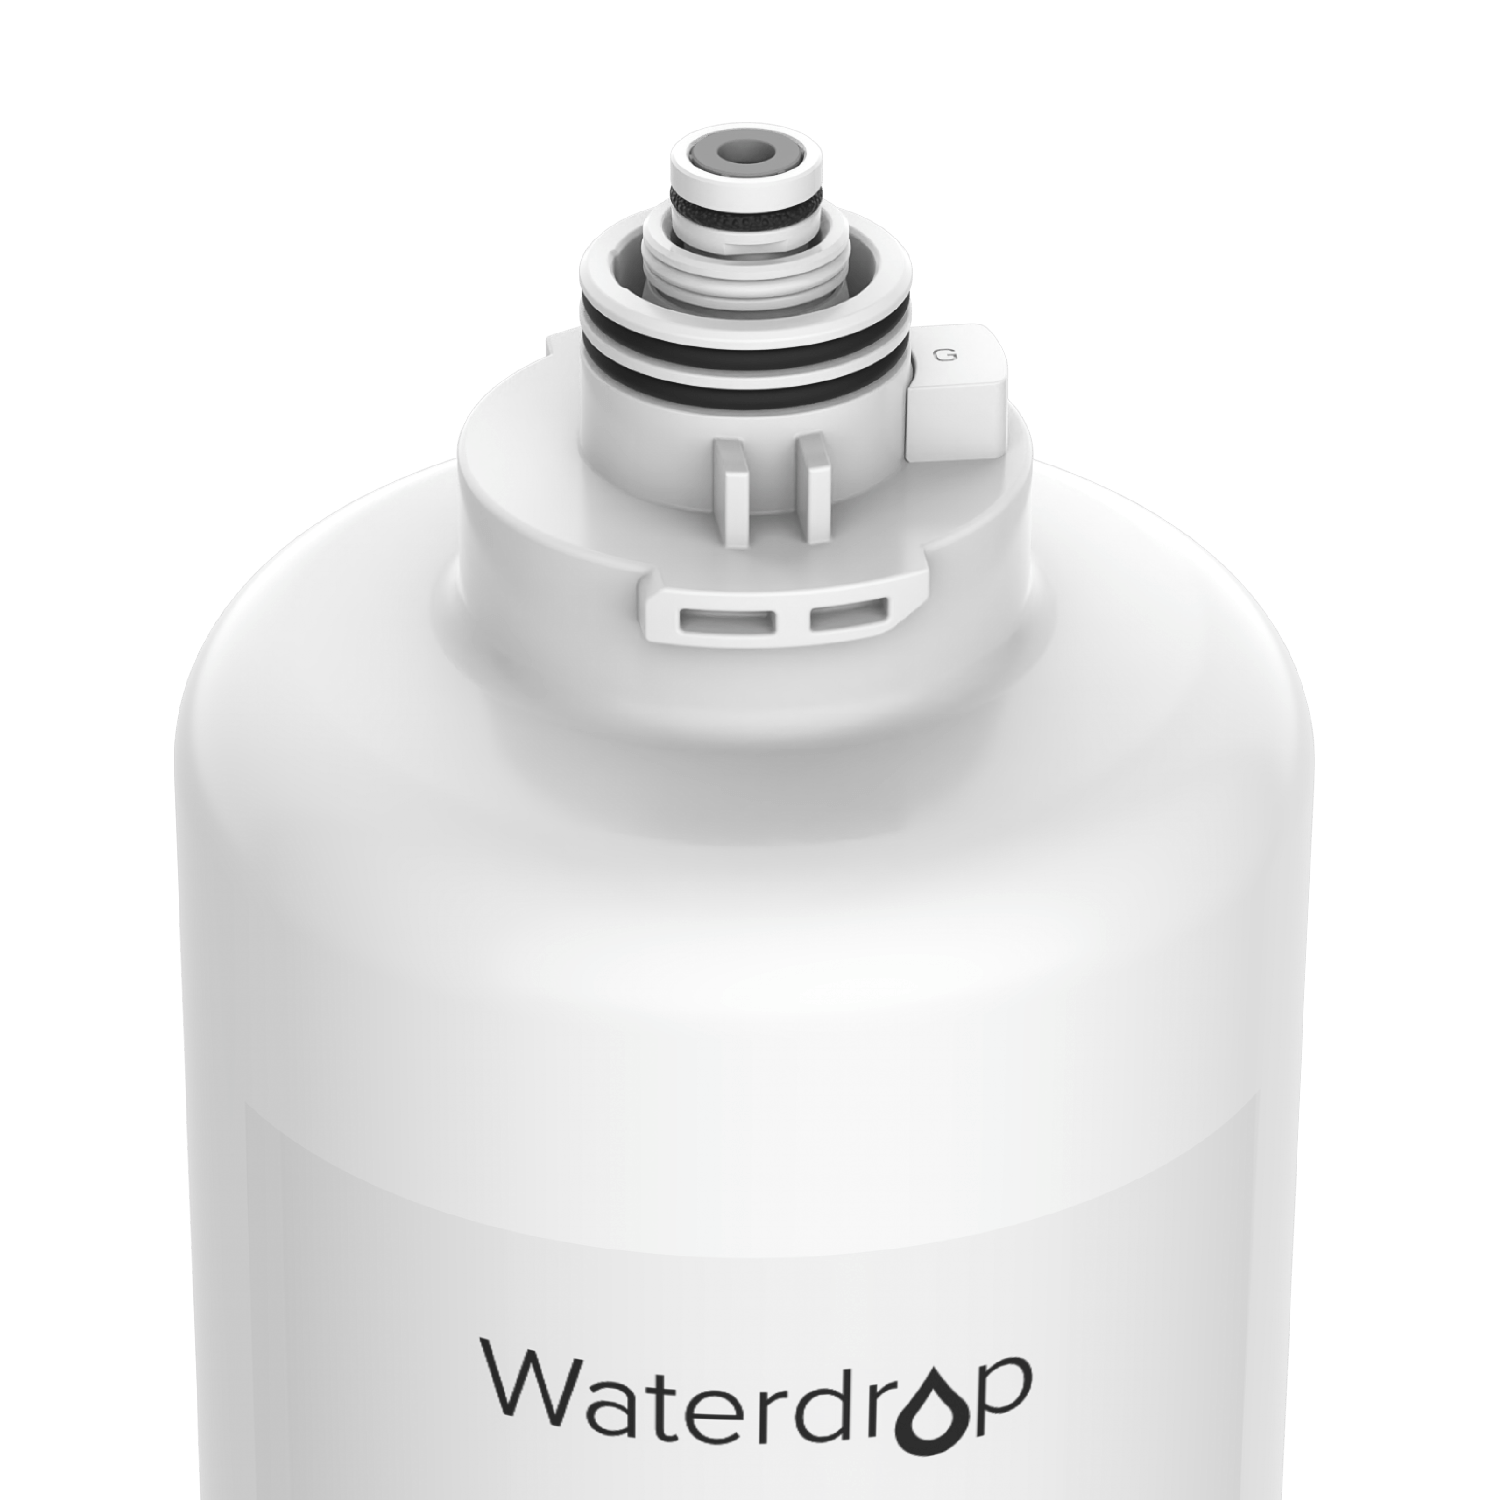 WD-KJF Filter for Waterdrop K6 Reverse Osmosis Instant Hot Water Dispenser System